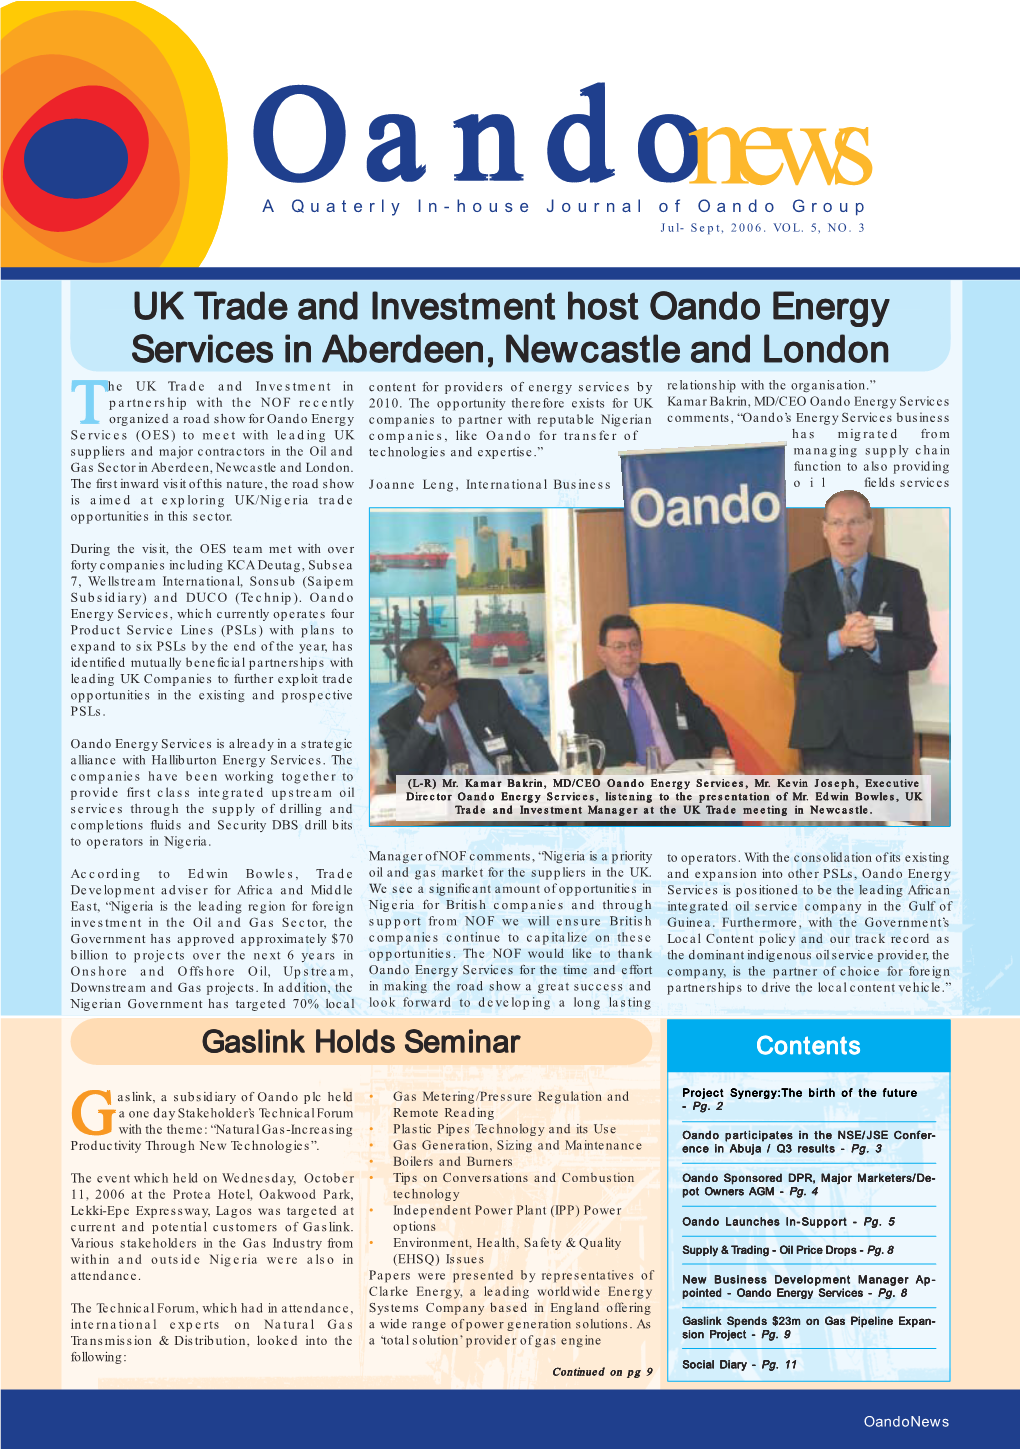 UK Trade and Investment Host Oando Energy Services In